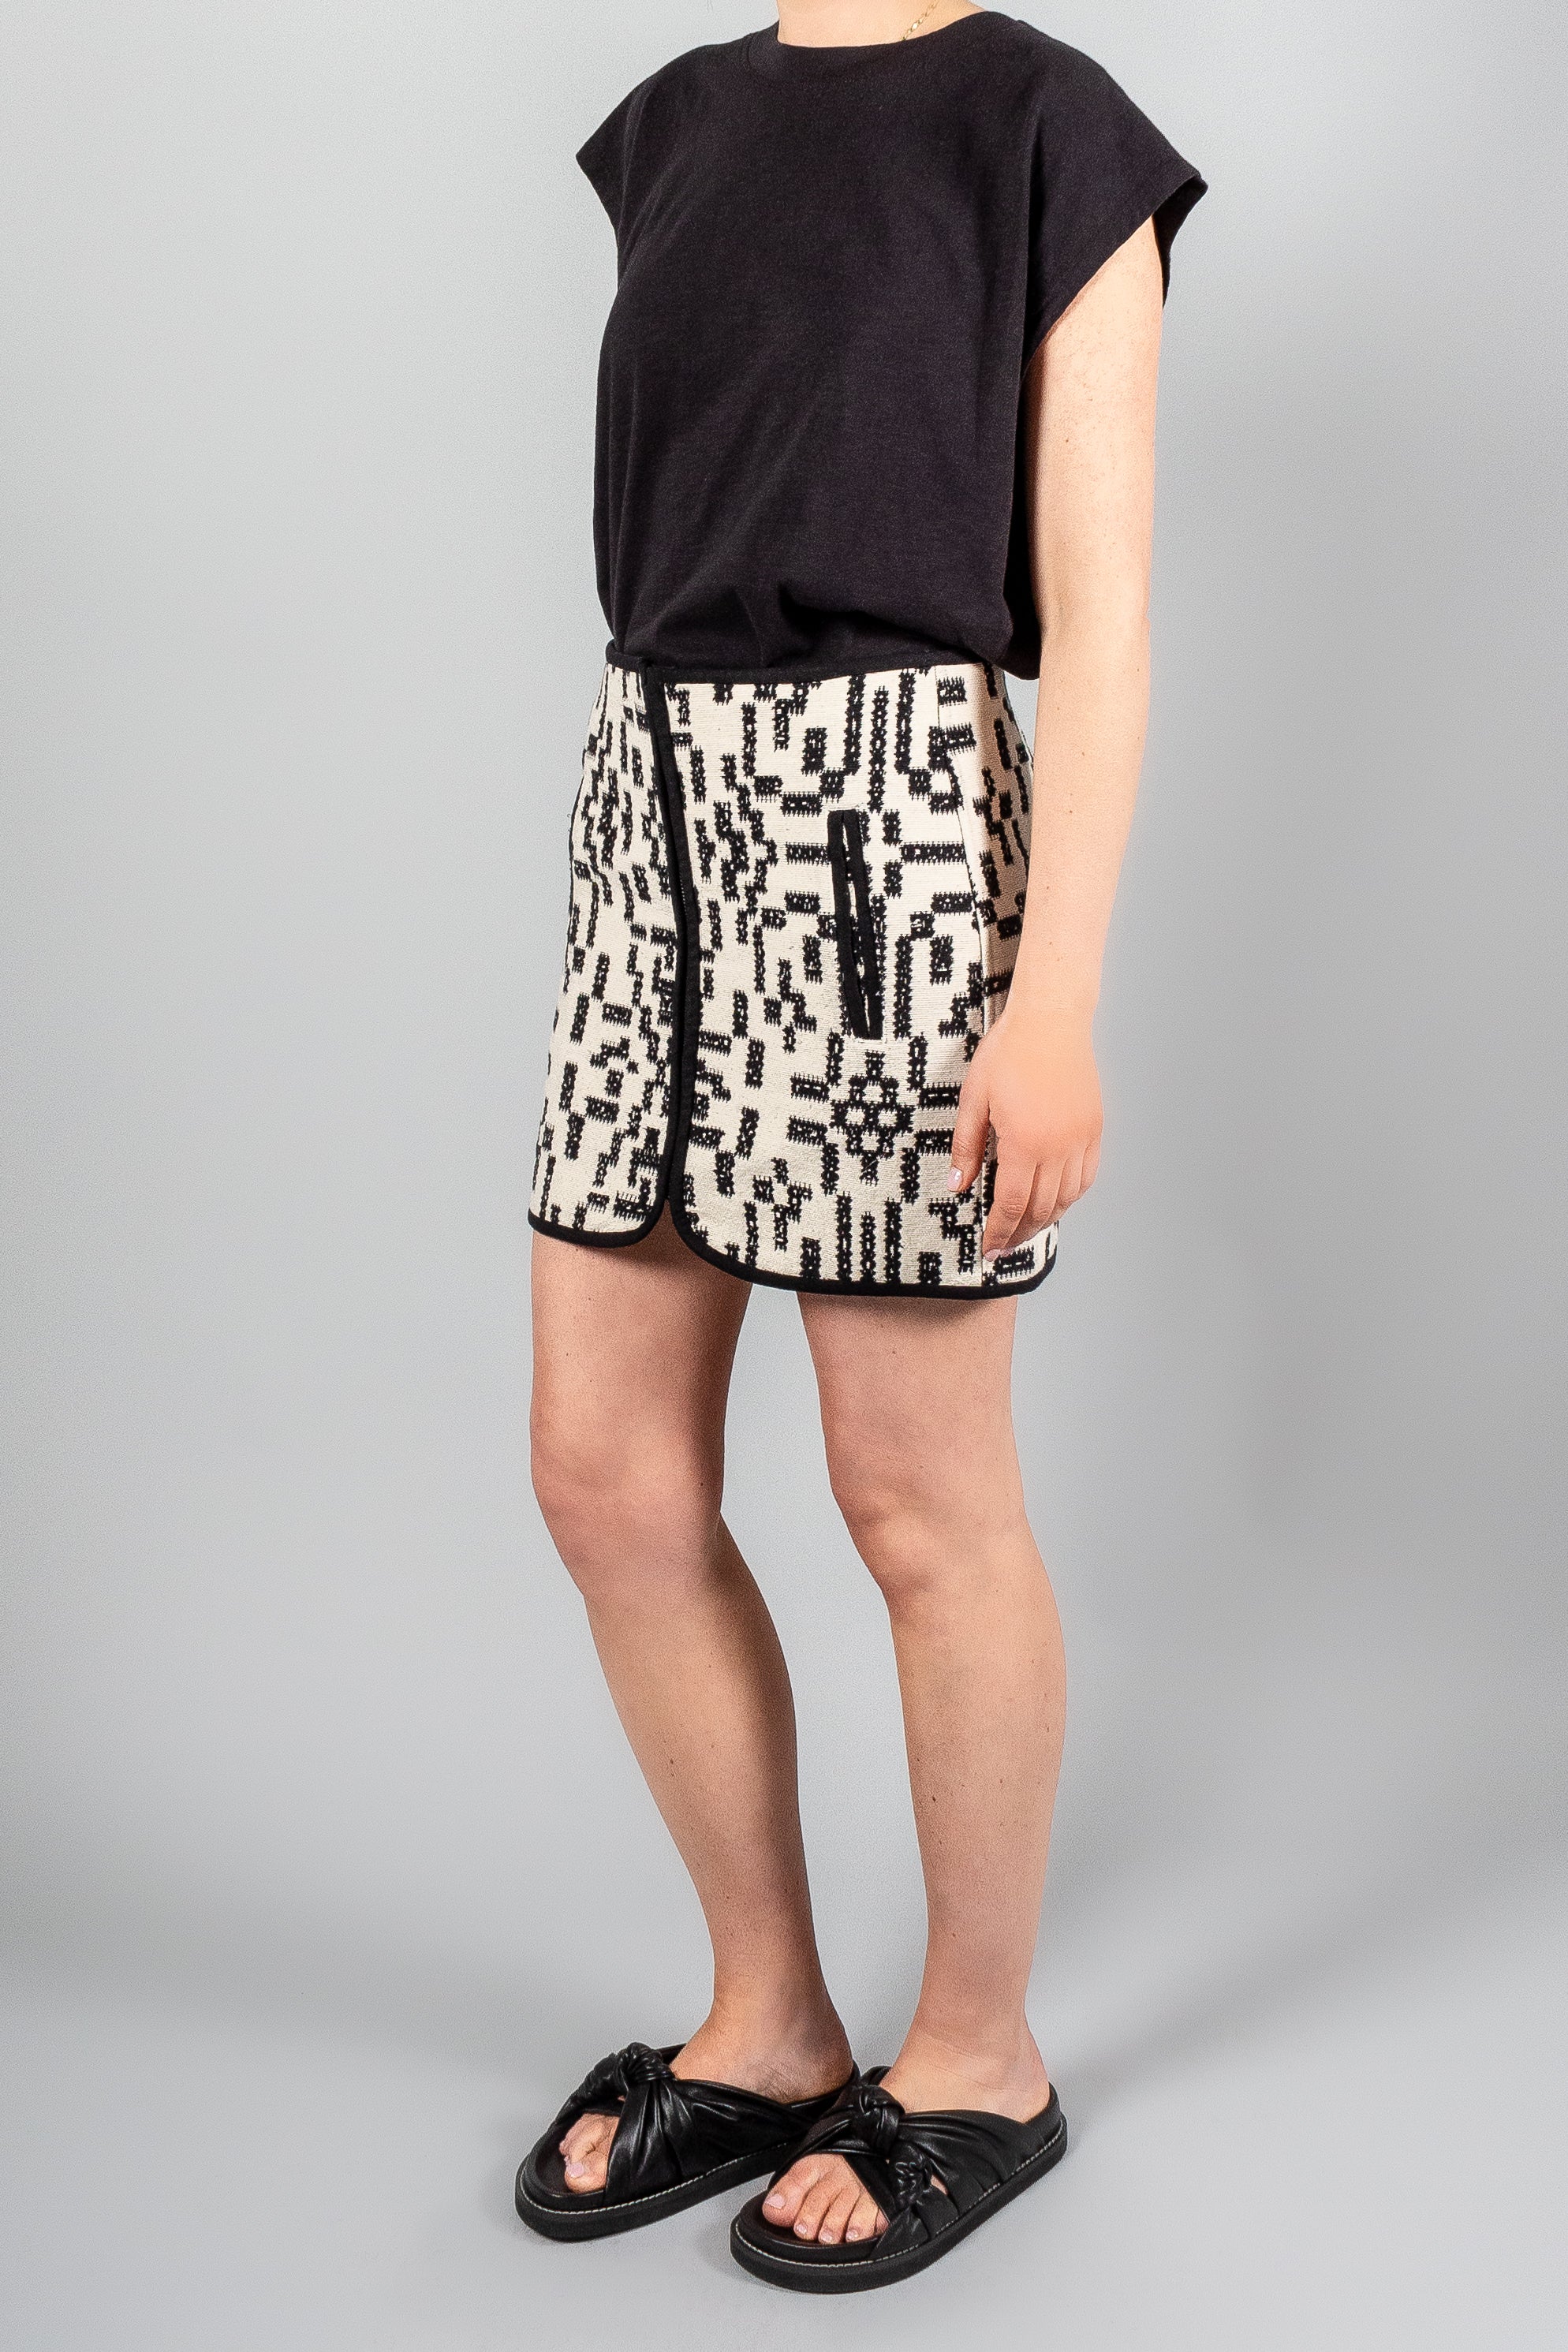 Isabel Marant Etoile Arona Skirt-Skirts-Misch-Boutique-Vancouver-Canada-misch.ca